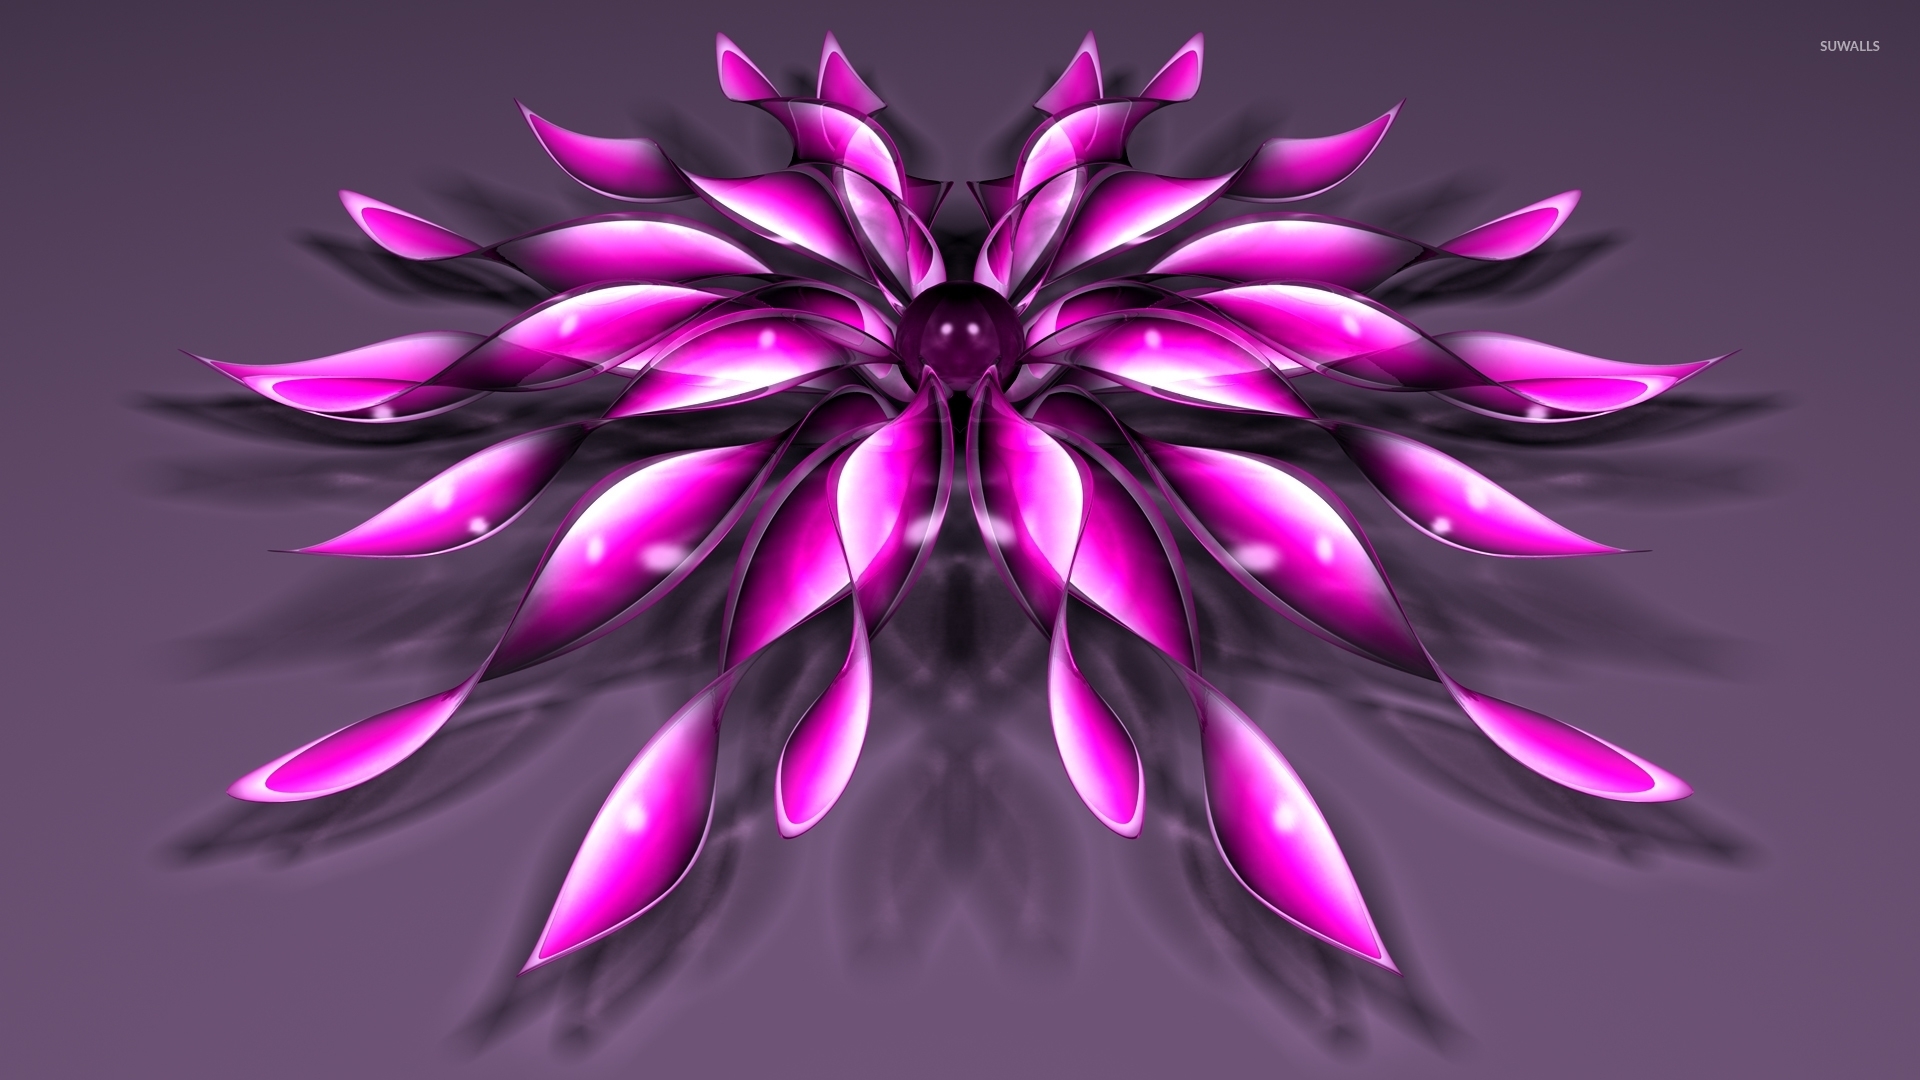 Pink flowers with a purple core wallpaper - 3D wallpapers - #53872